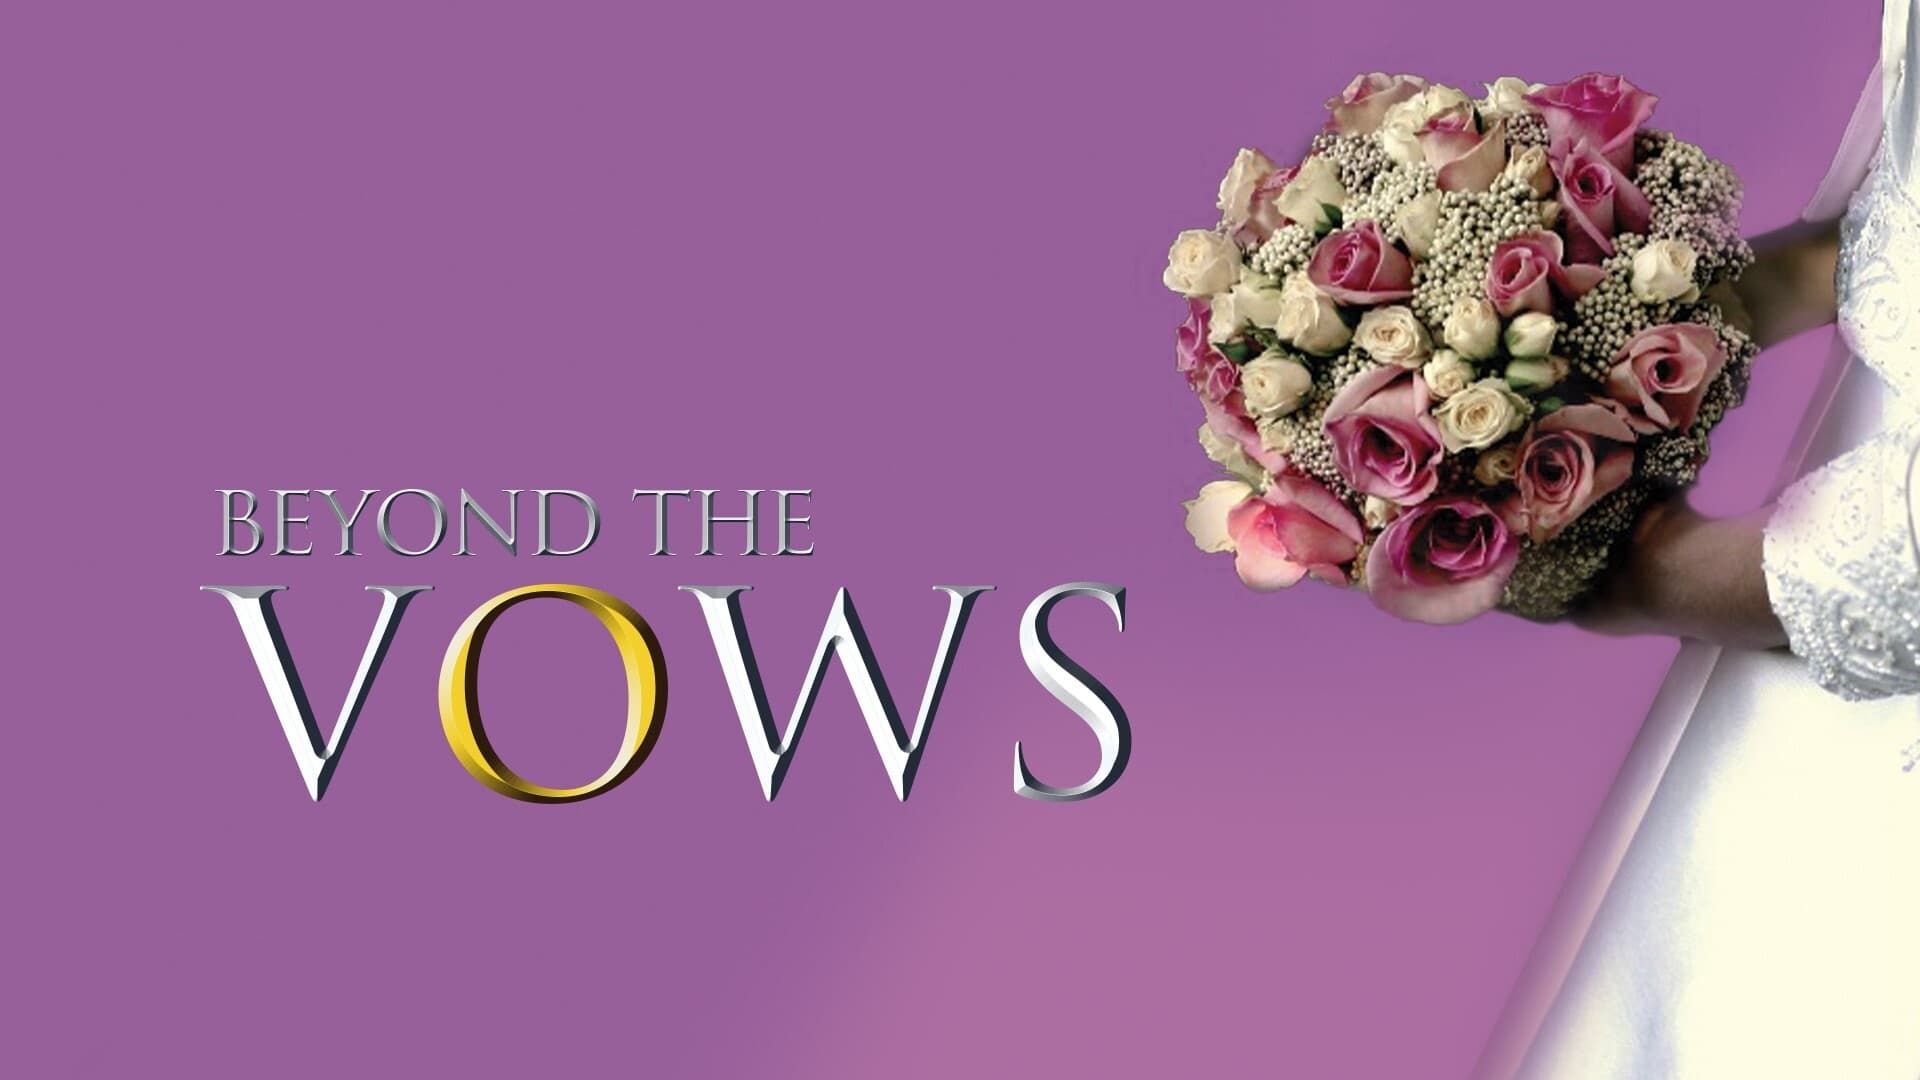 Beyond the Vows background